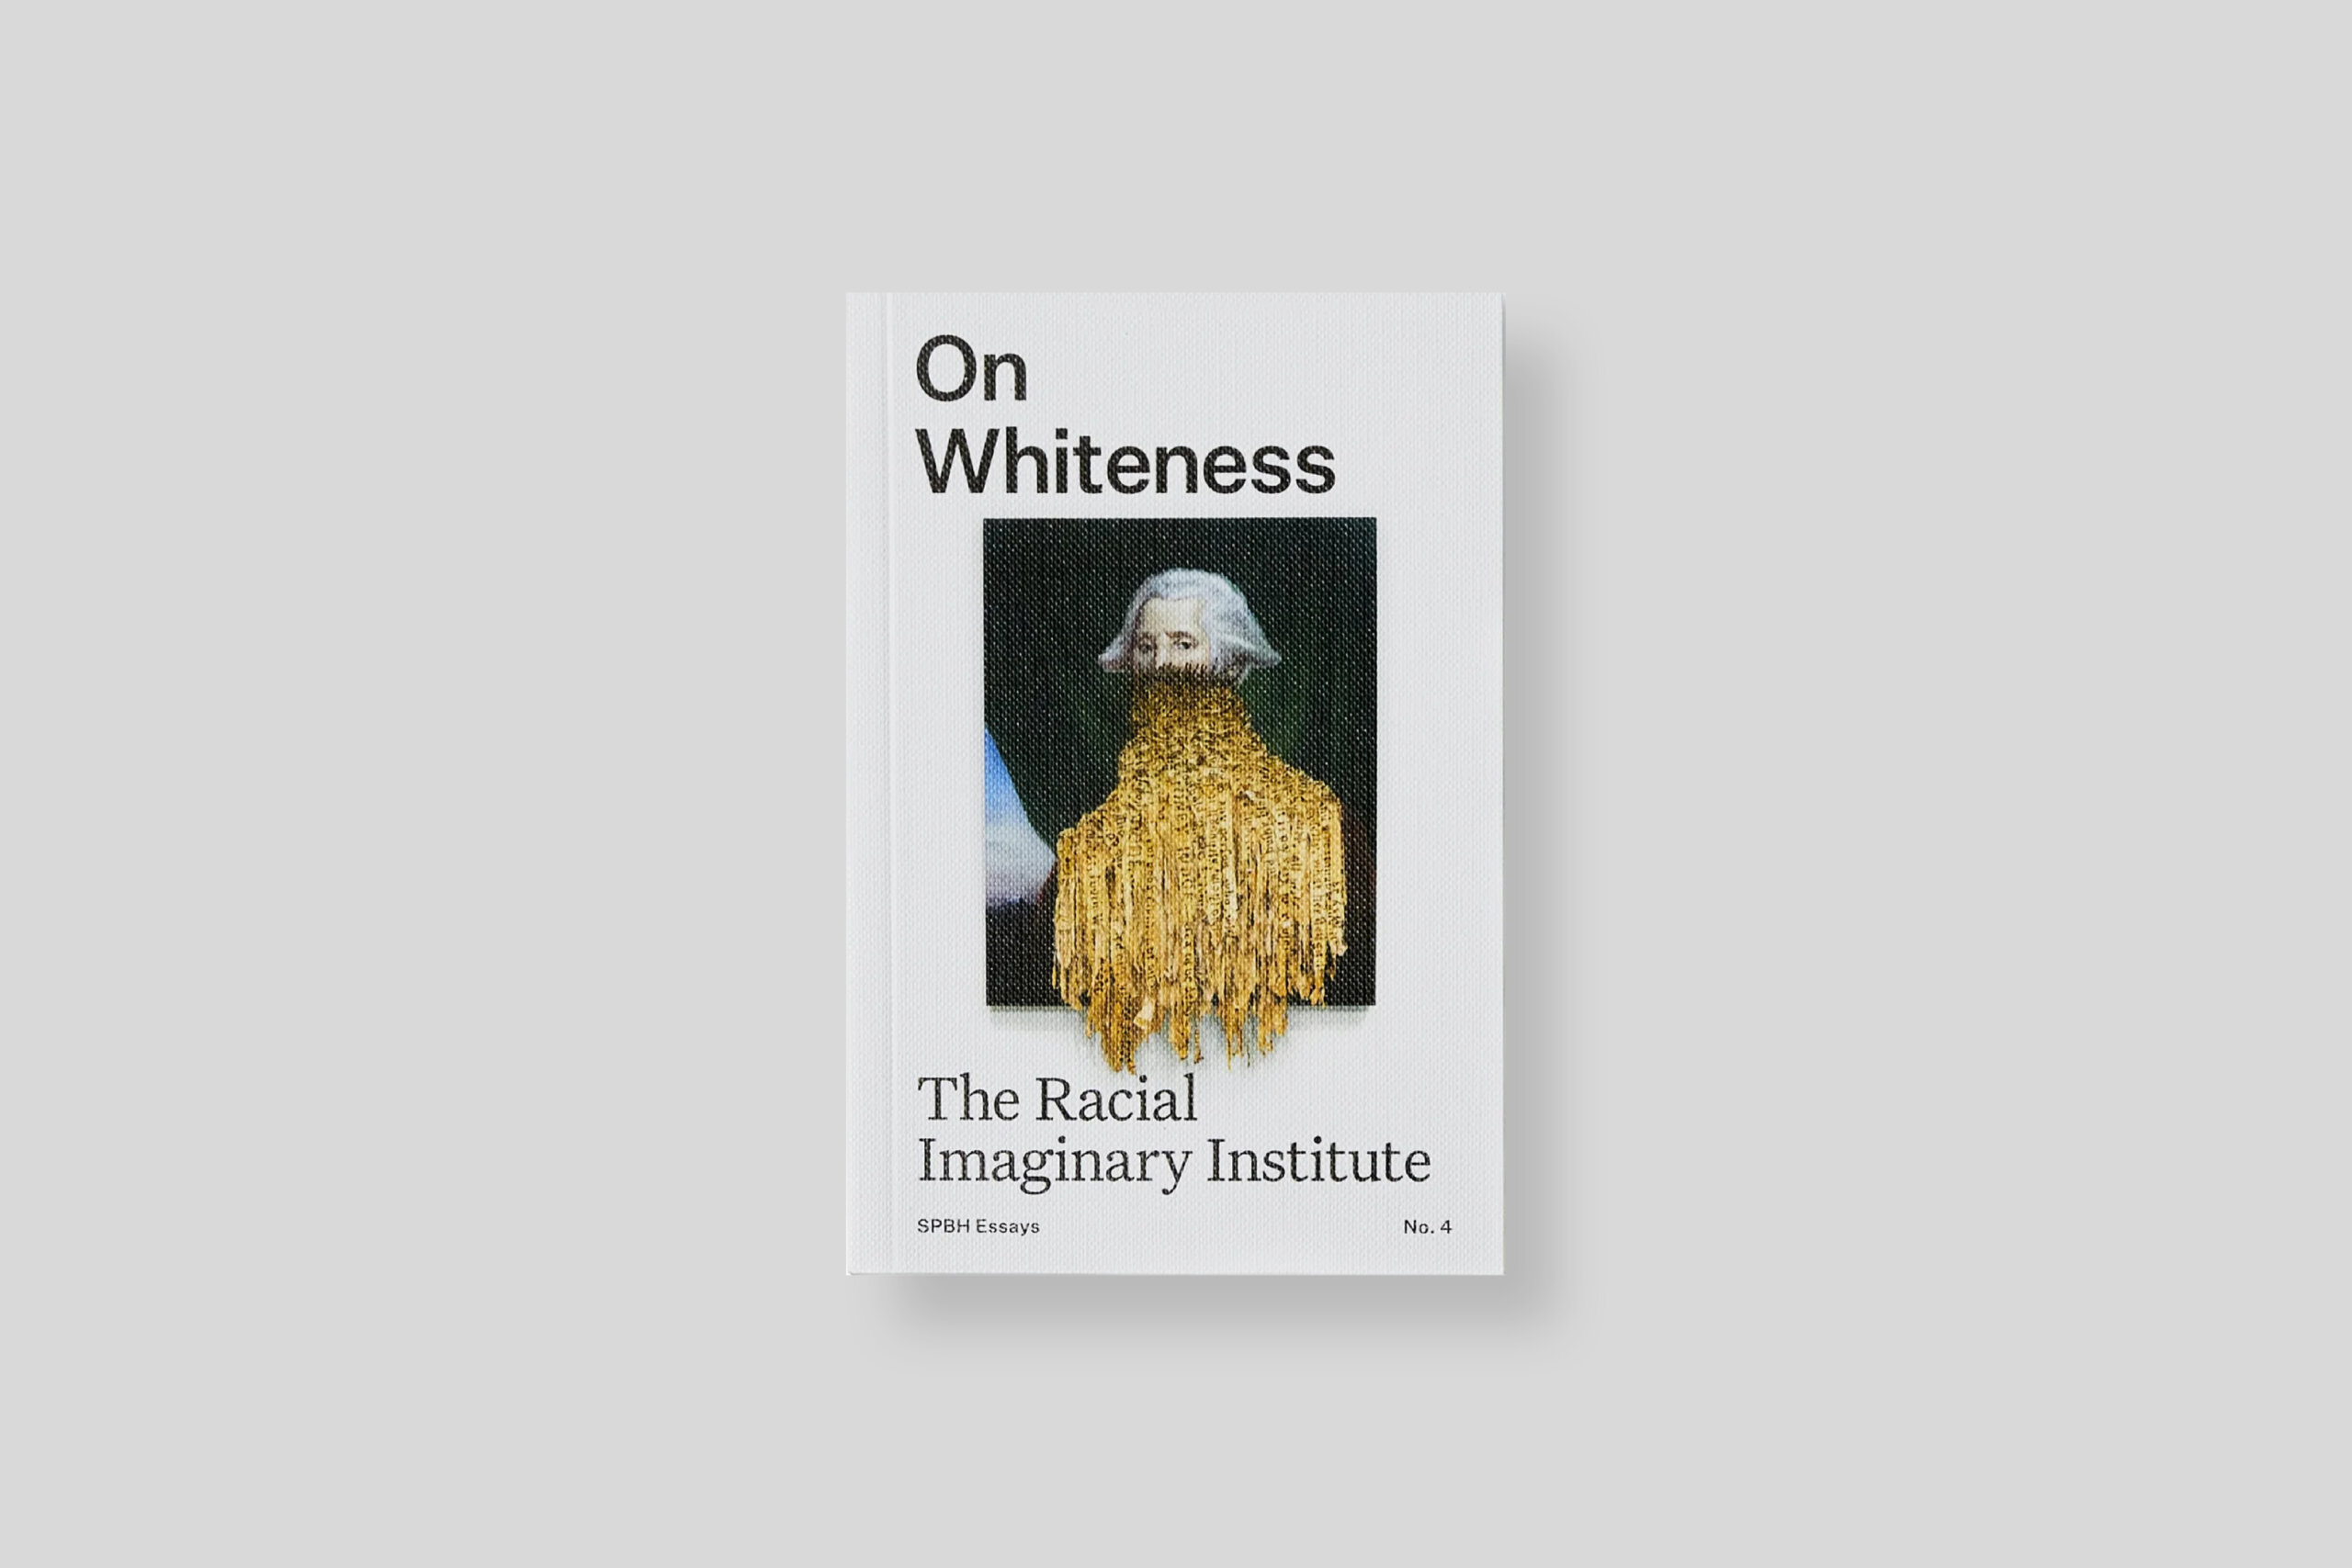 oh-whiteness-racial-imaginary-institute-spbh-cover